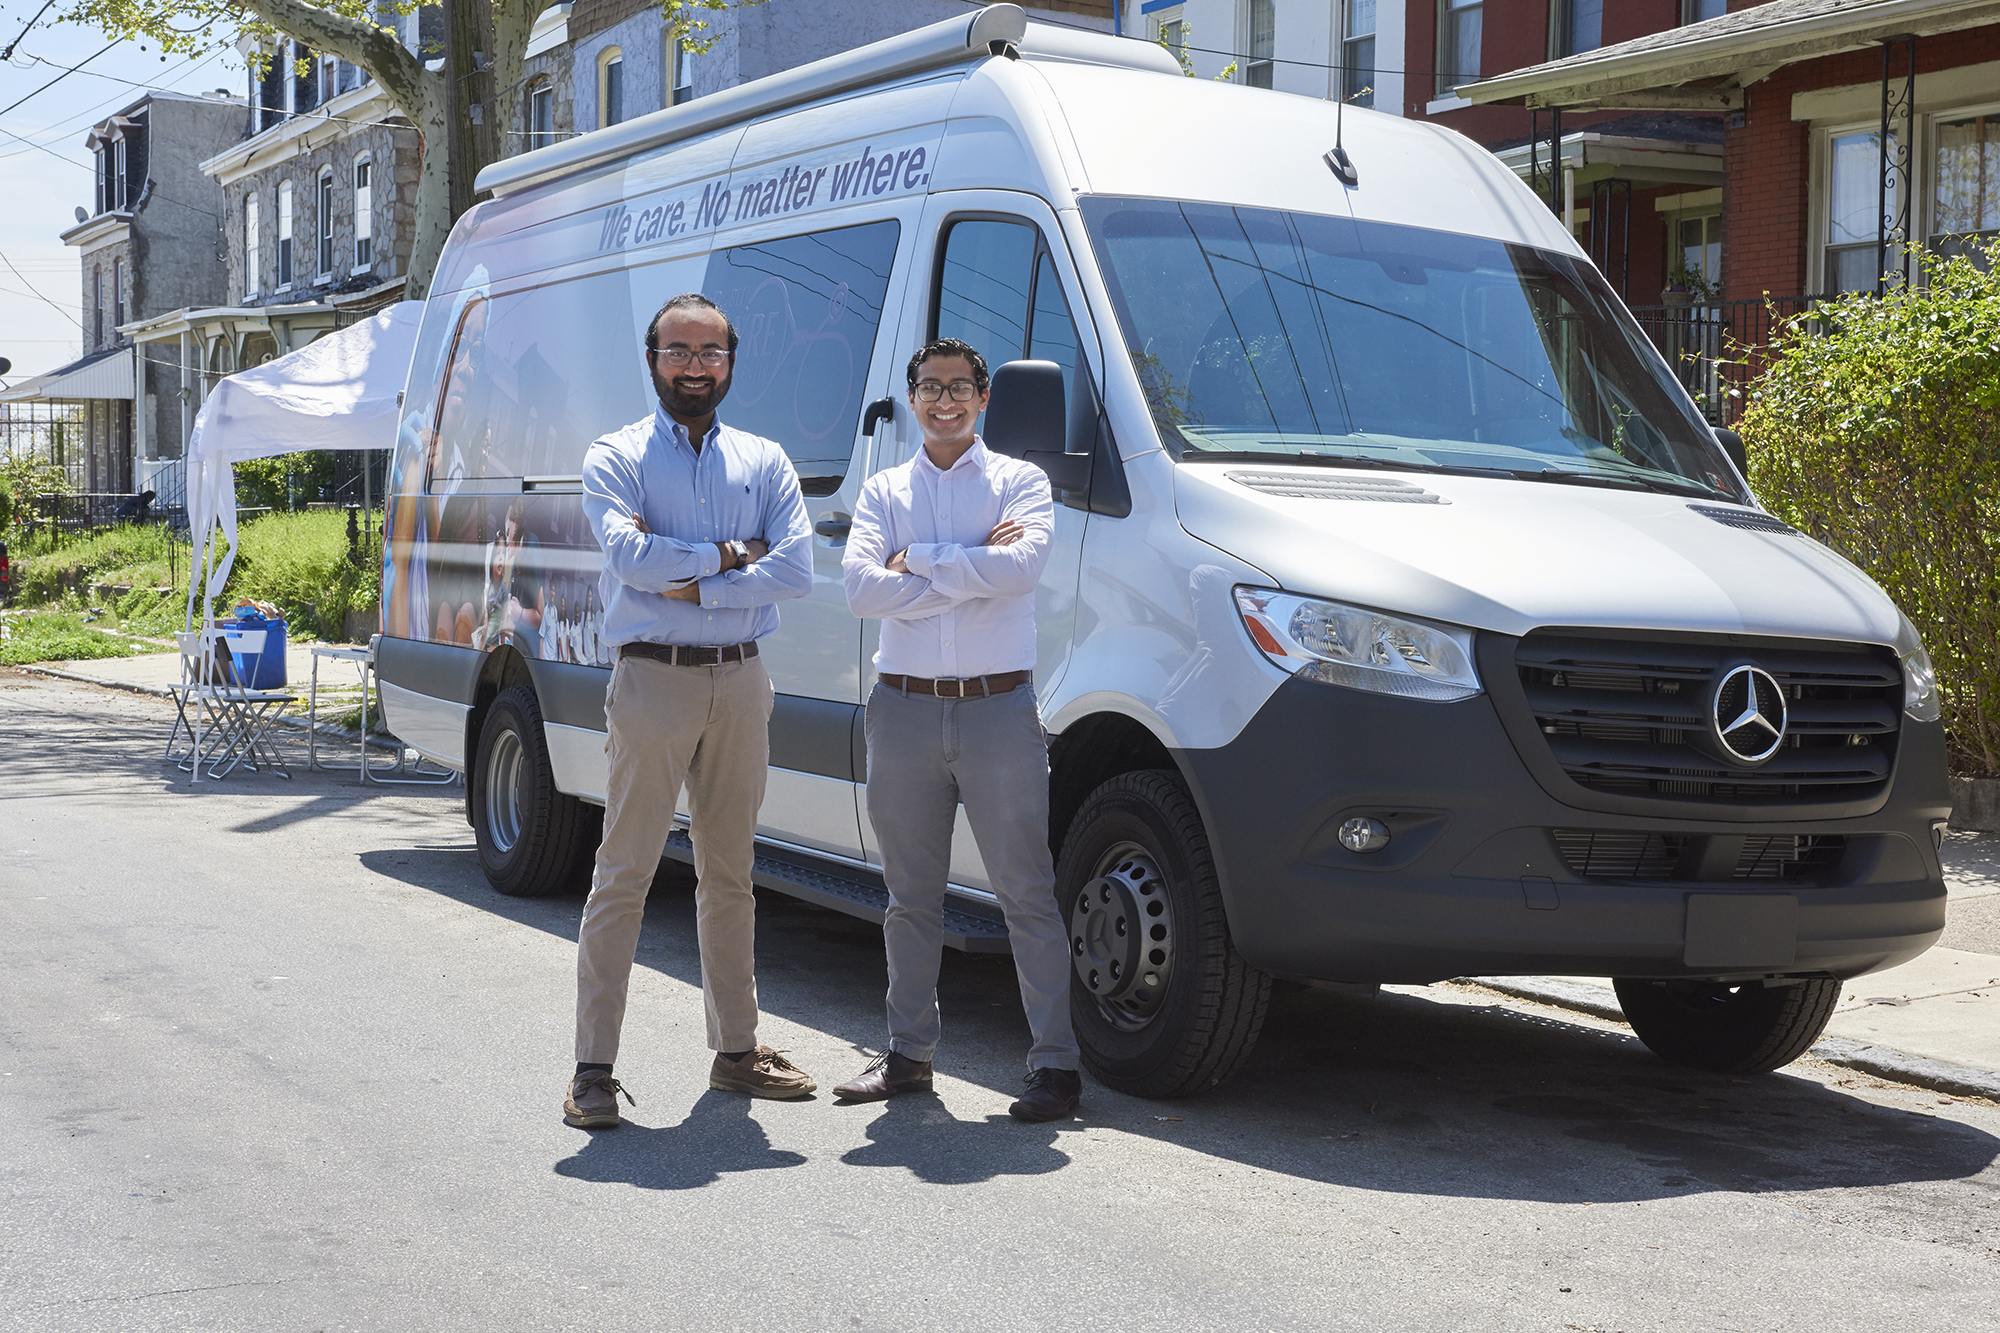 Sayre Mobile Clinic founders in front of van